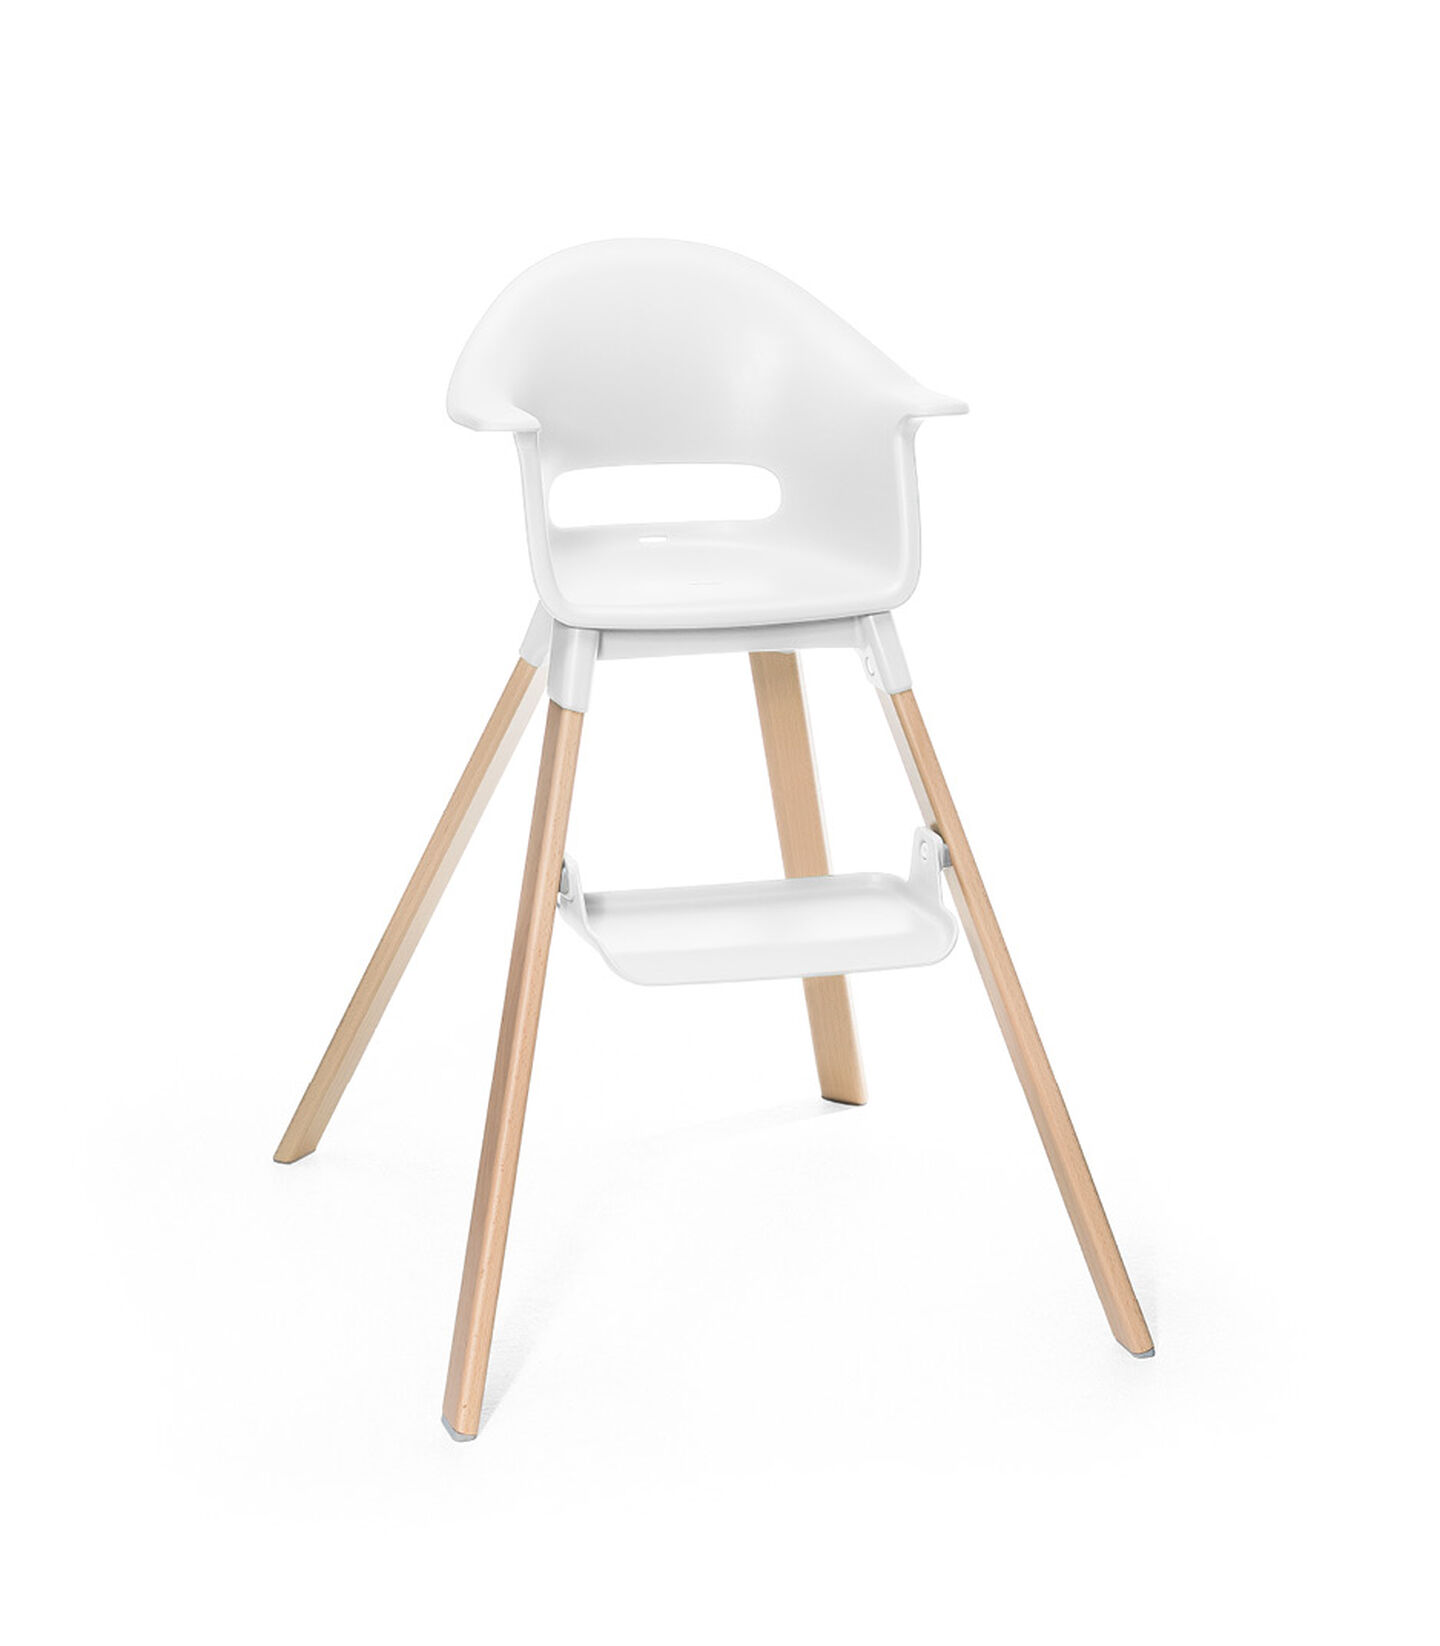 Stokke® Clikk™ High Chair White, Wit, mainview view 3